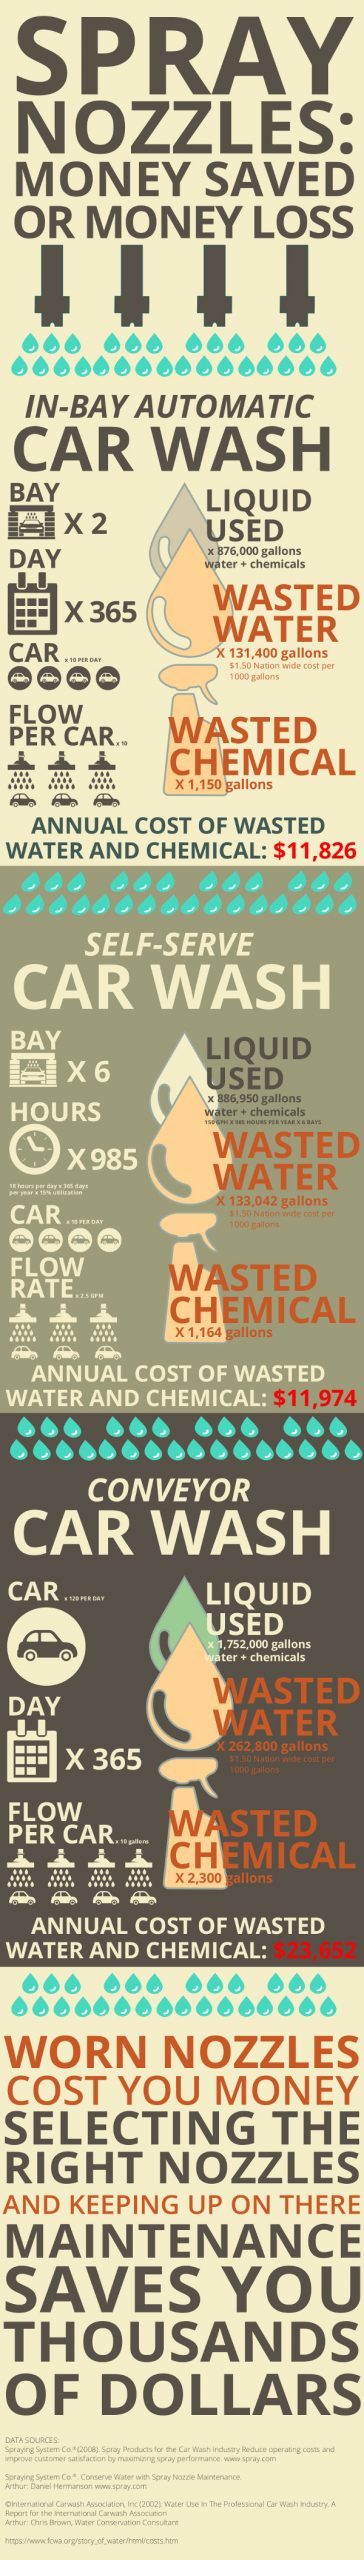 Infographic provided by Kleen-Rite Corp., spray nozzles, carwashes